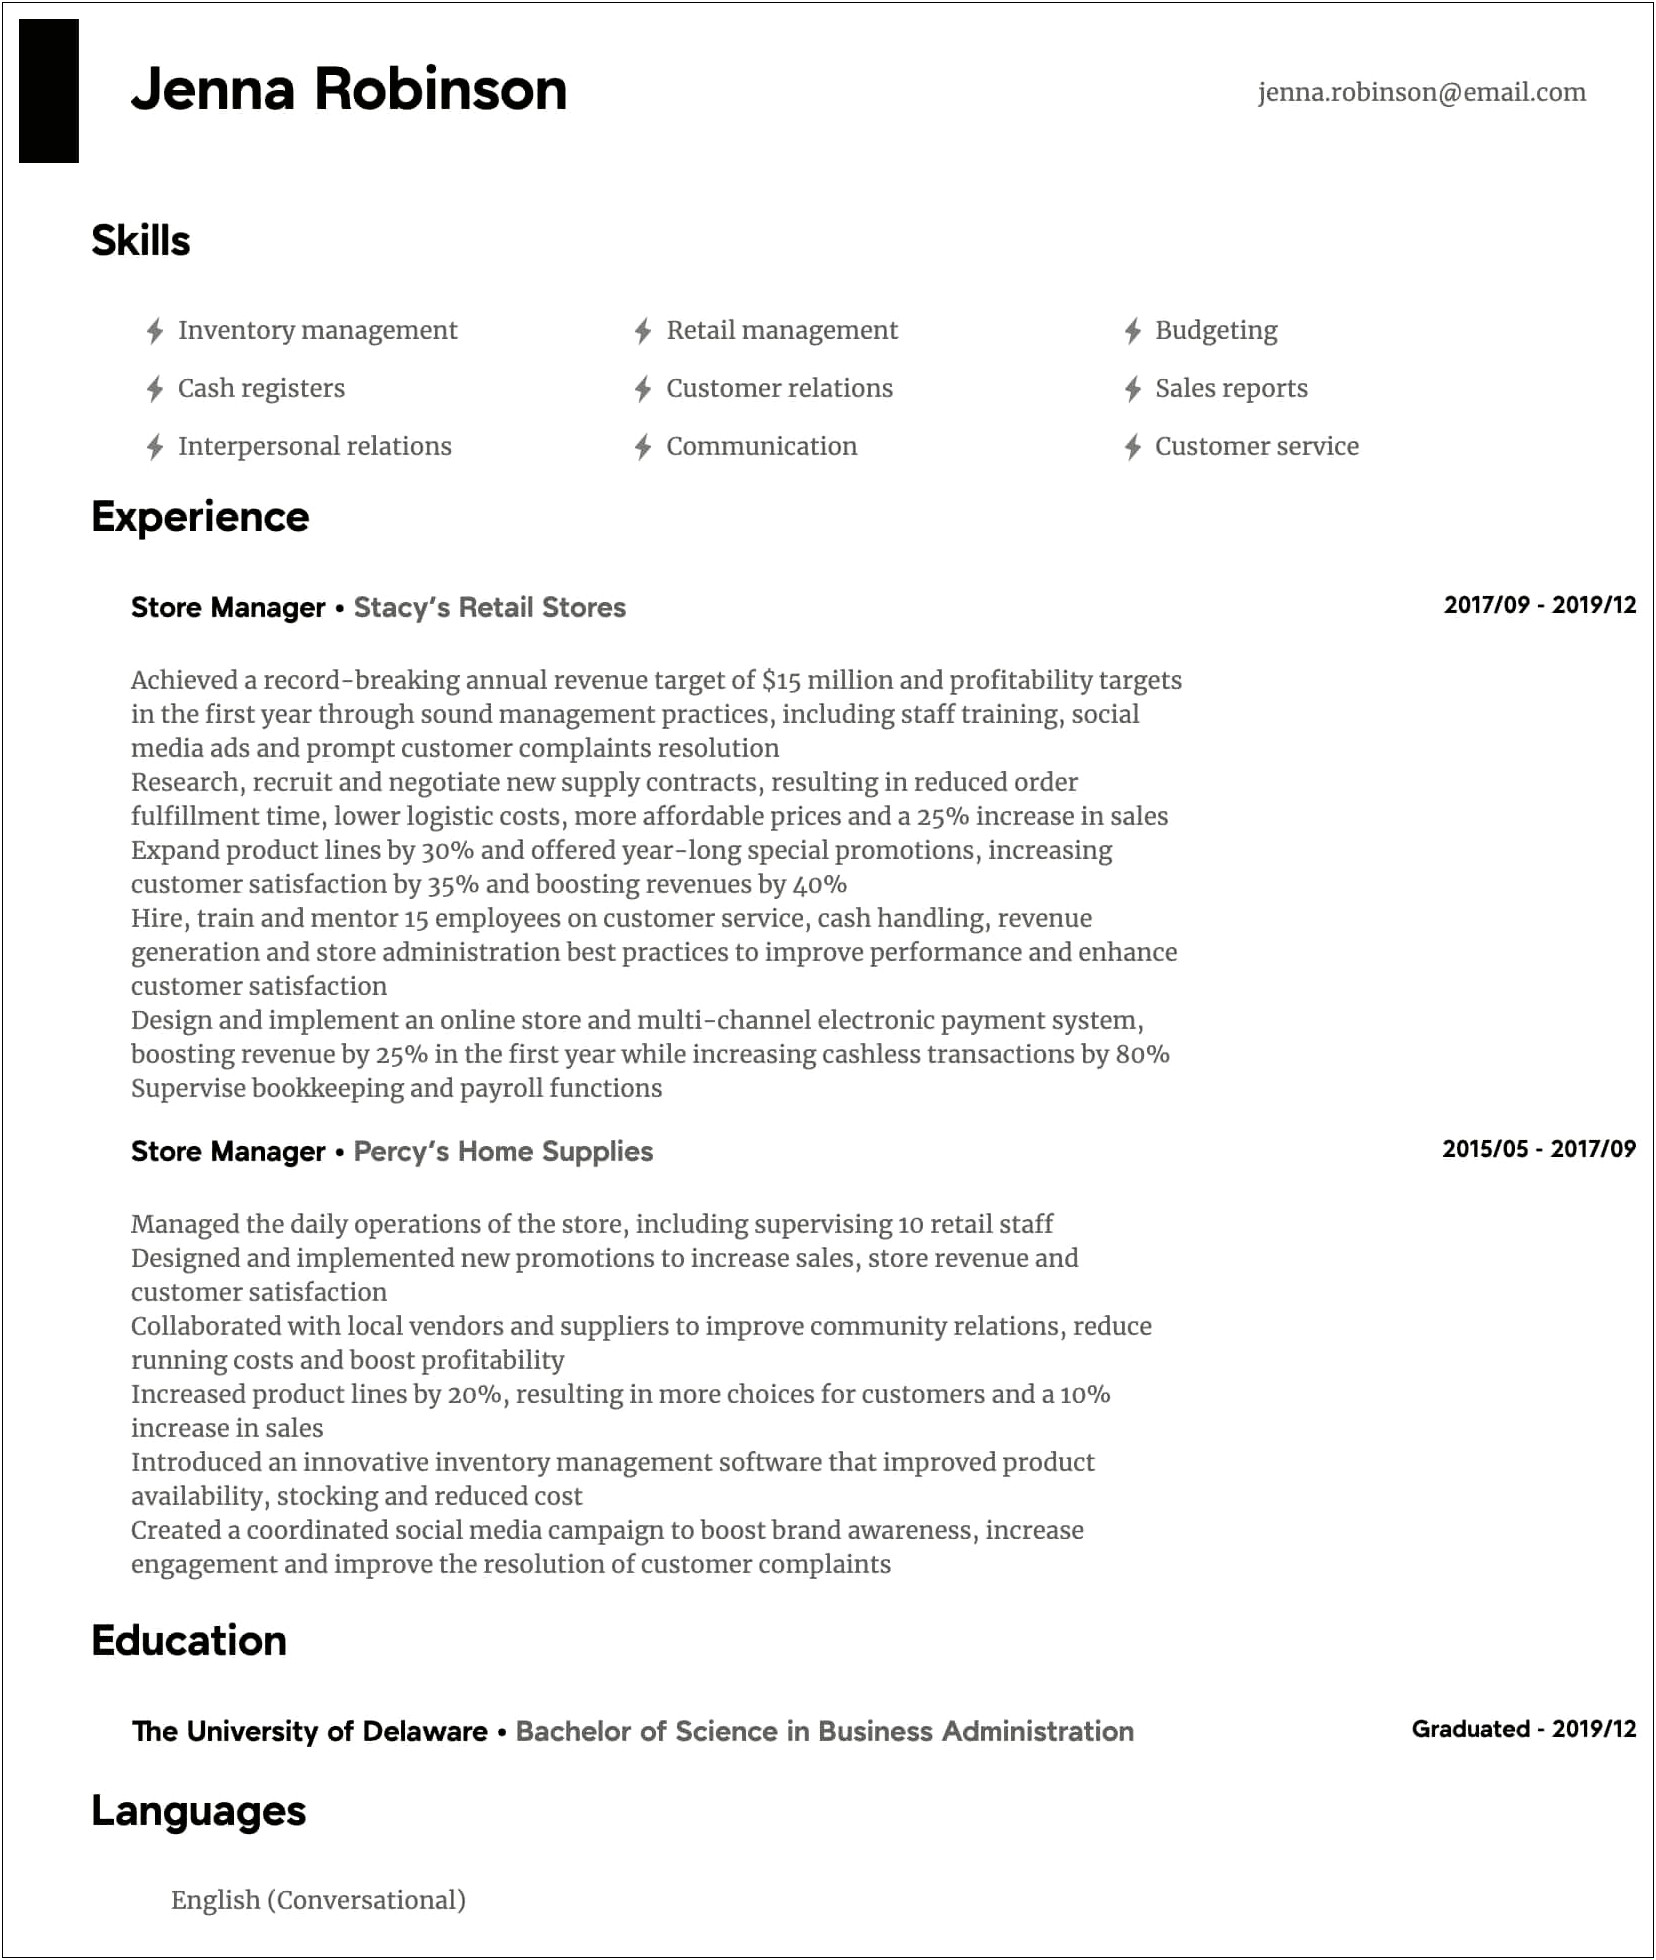 Resume Template For Grocery Manager Position